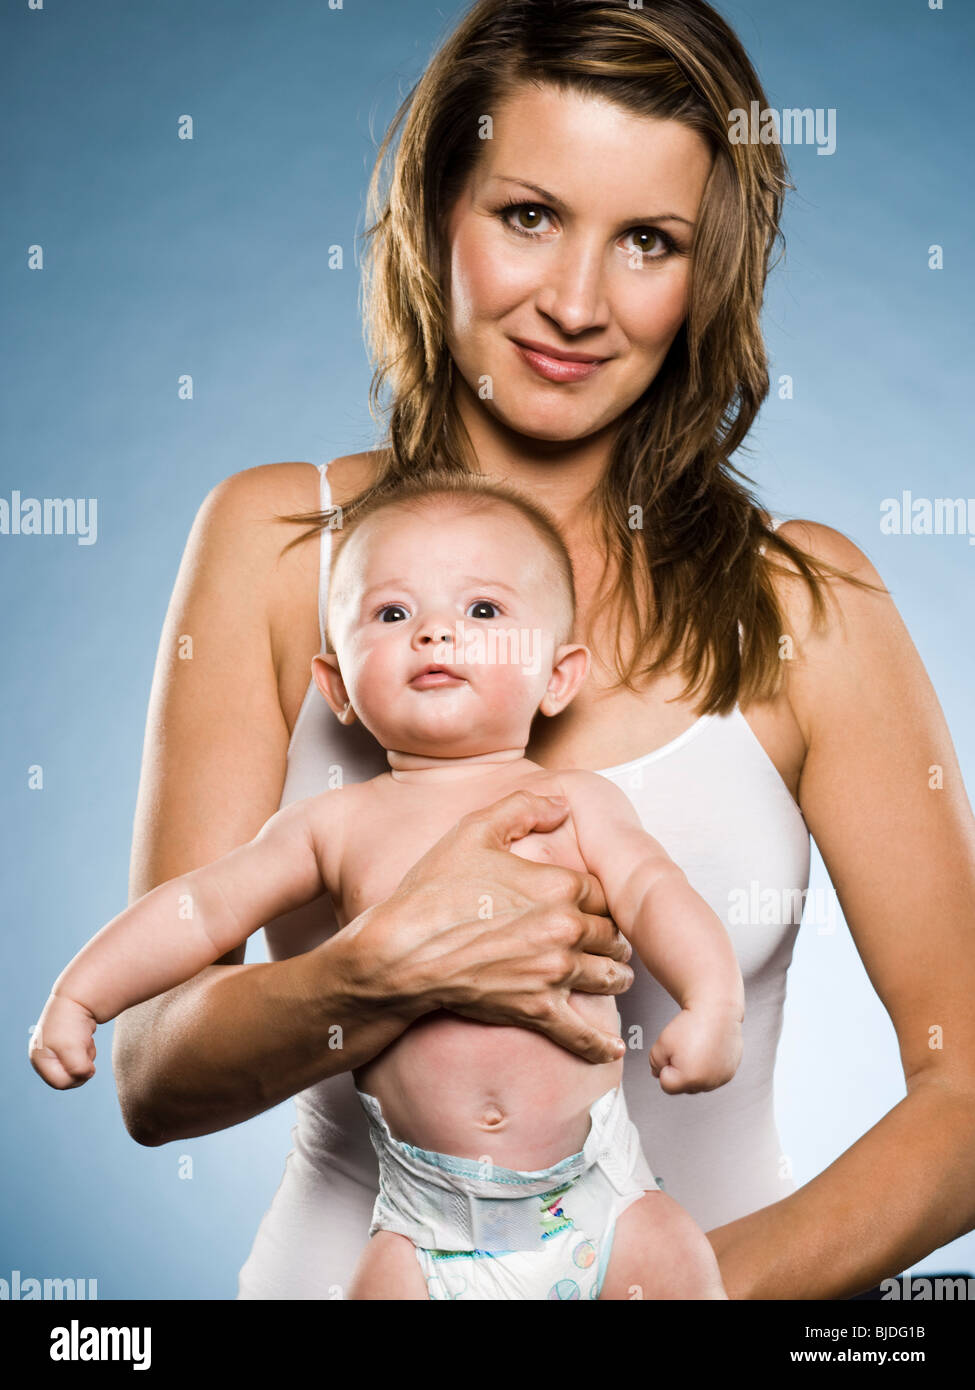 Woman and baby. Stock Photo